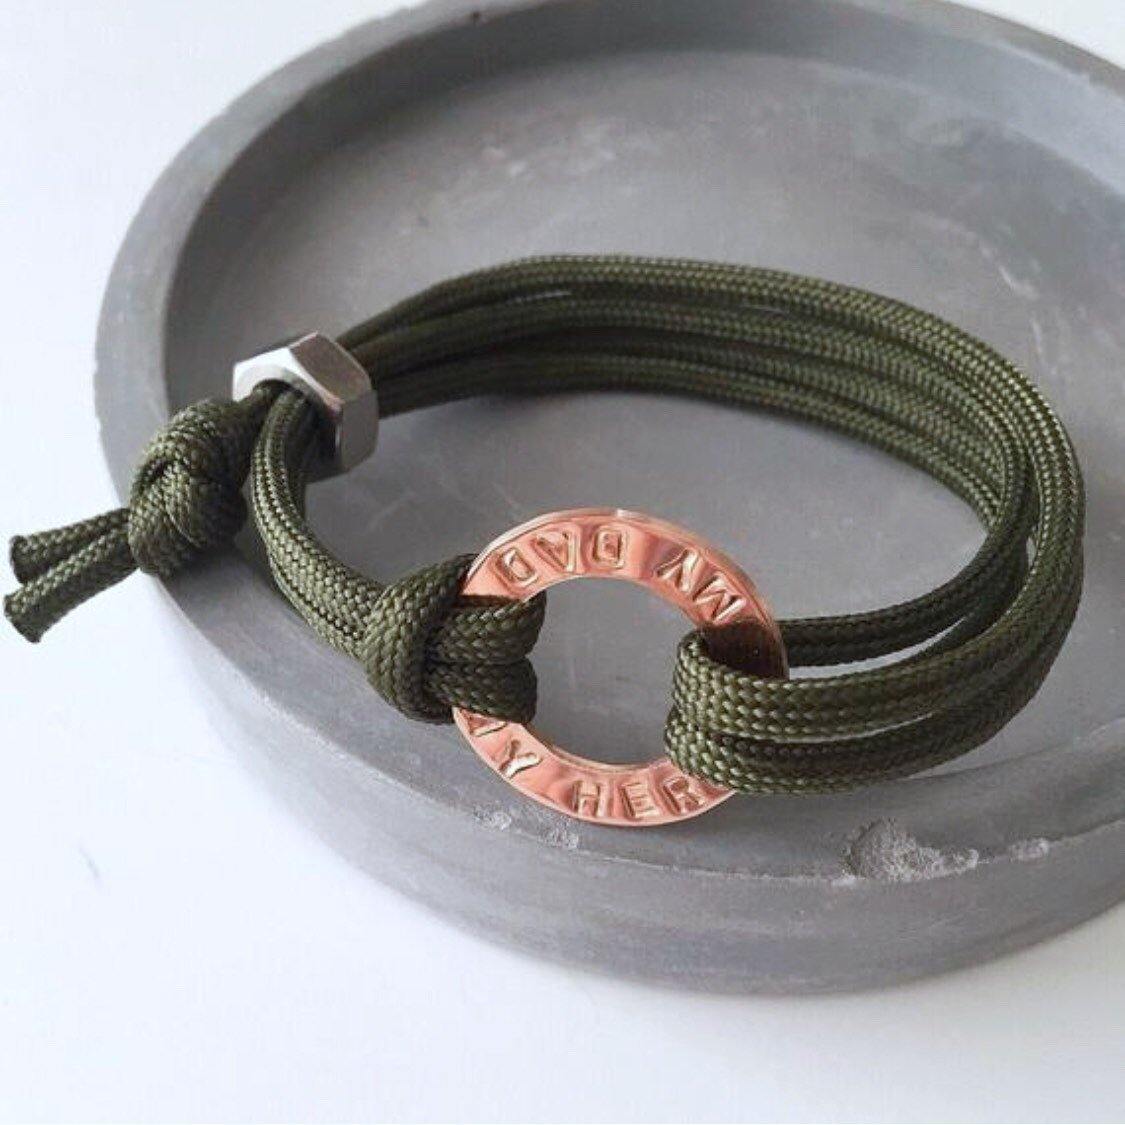 Father’s Day Bracelet, Personalised Men’s Jewellery, Copper and Paracord dad bracelet. - The Little Stamping Co.